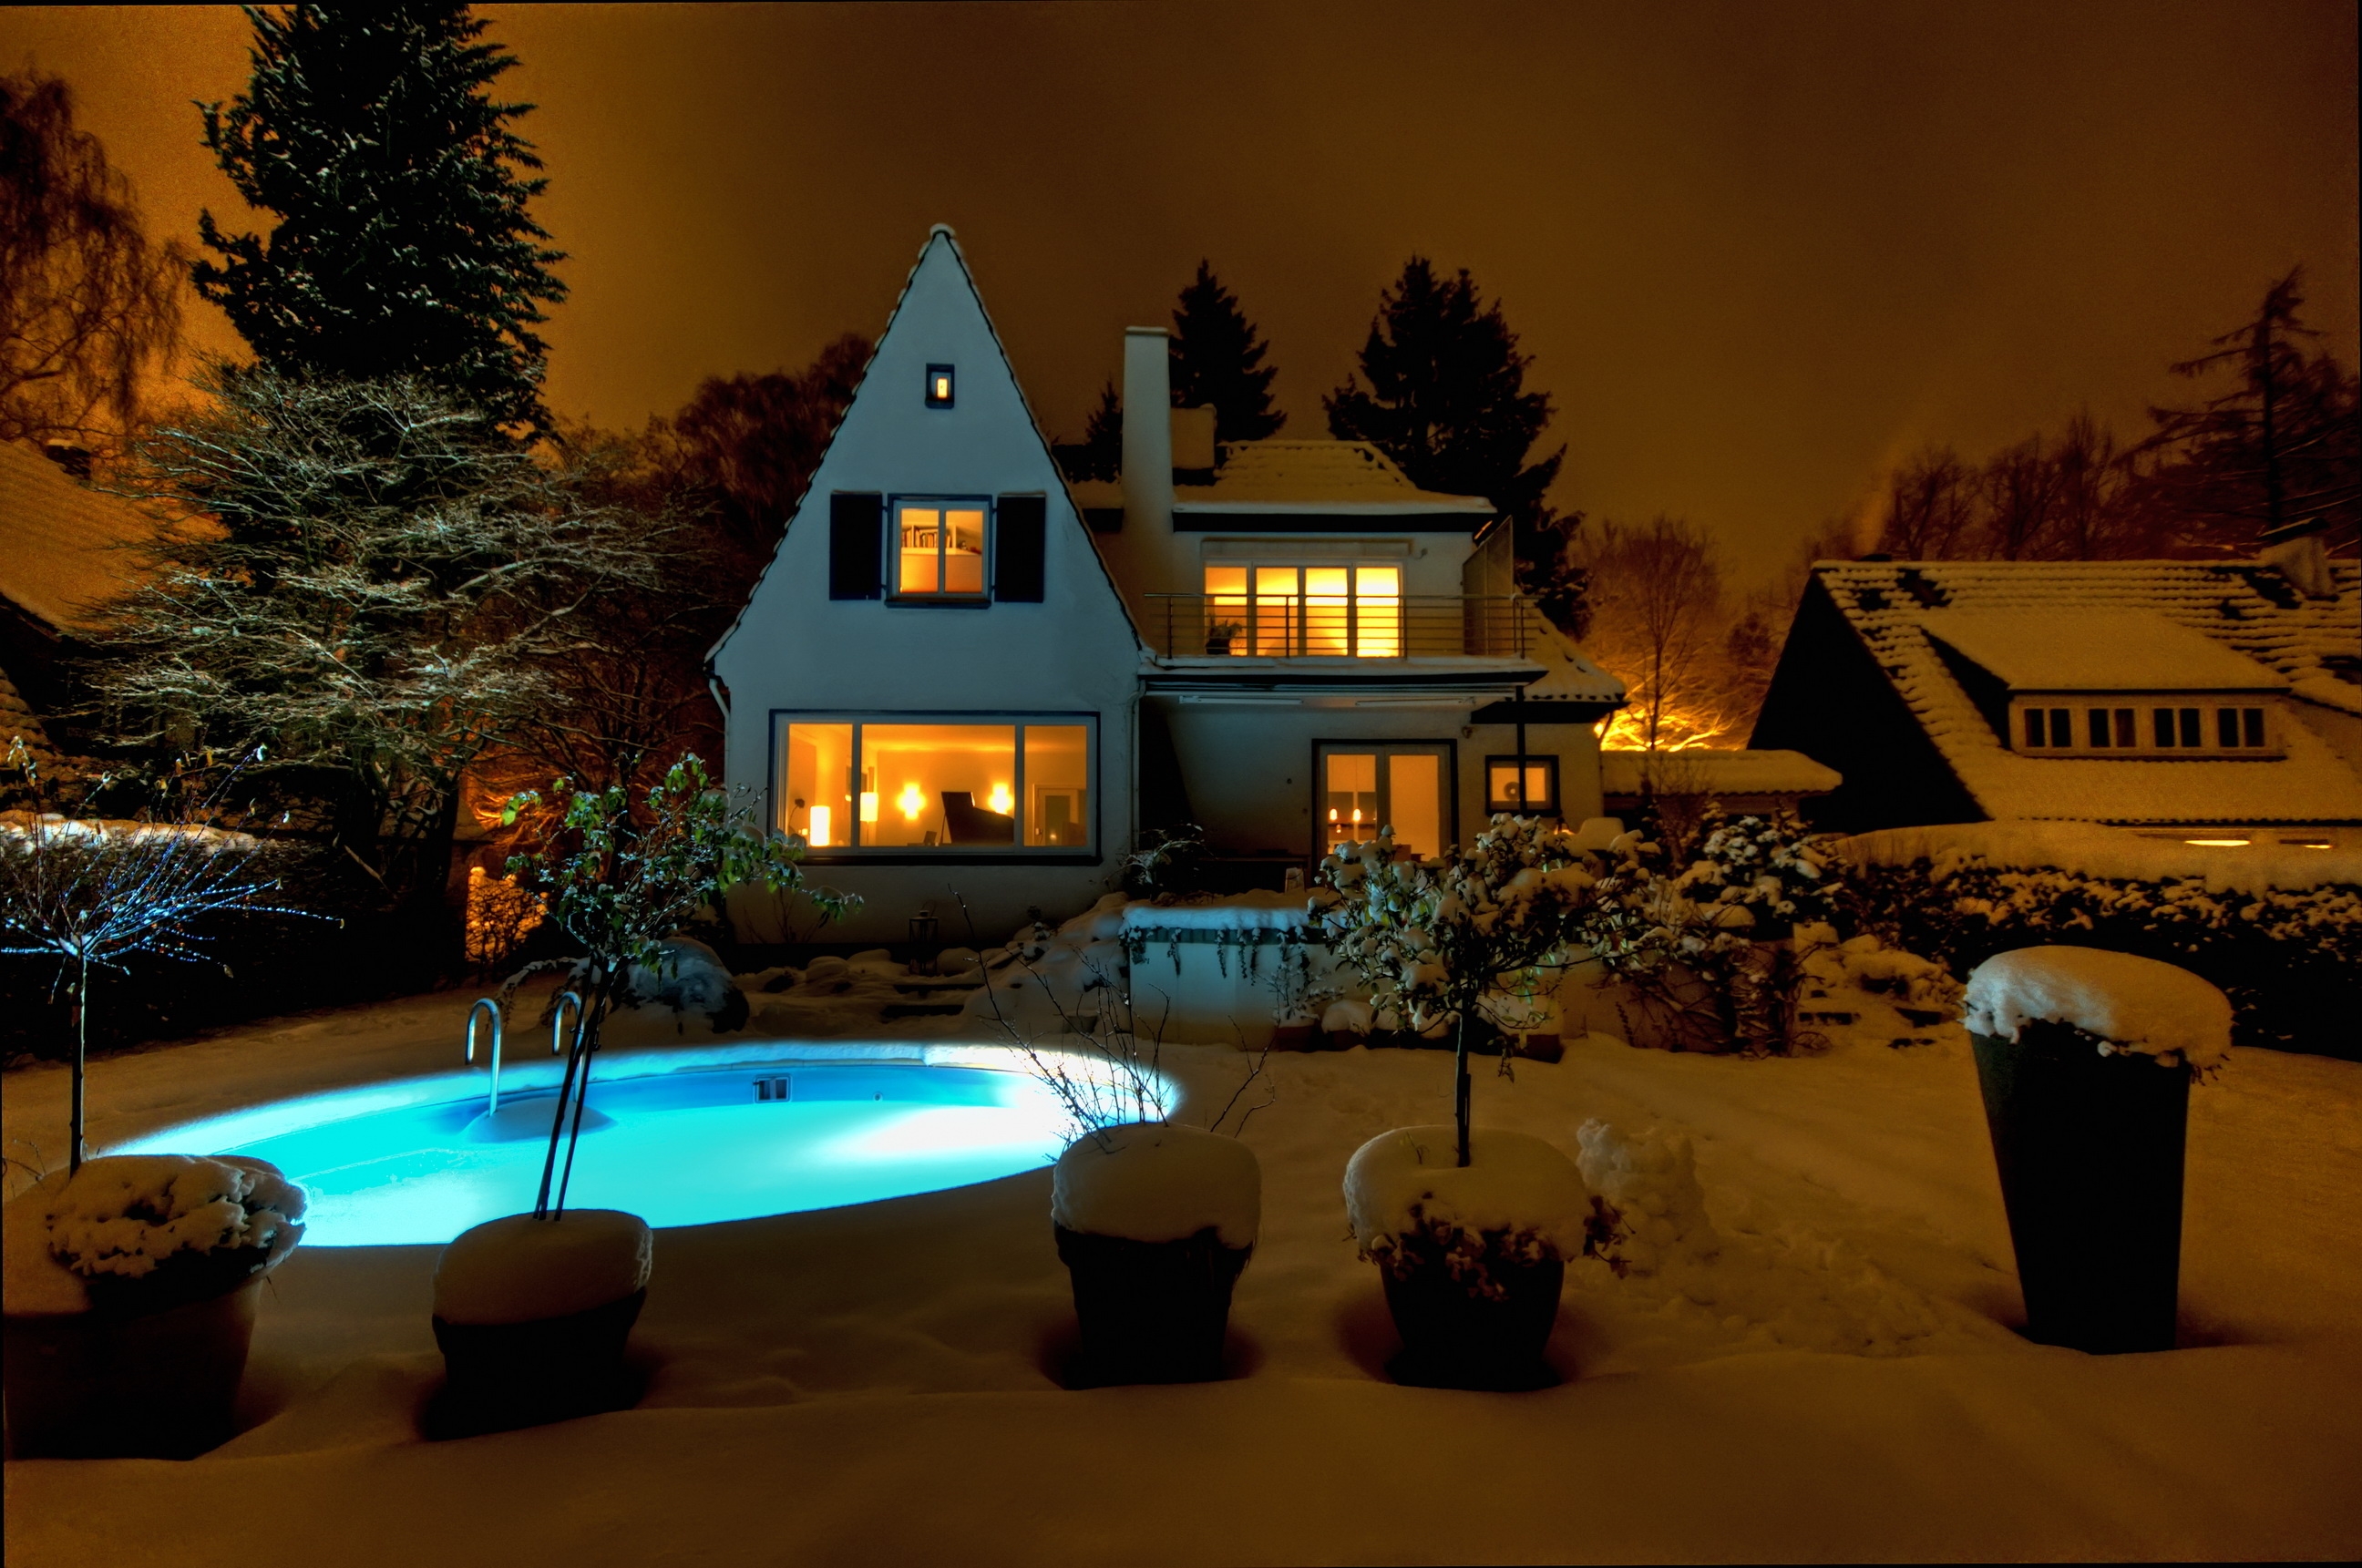 houses, cities, night, snow, mansion, pools cellphone